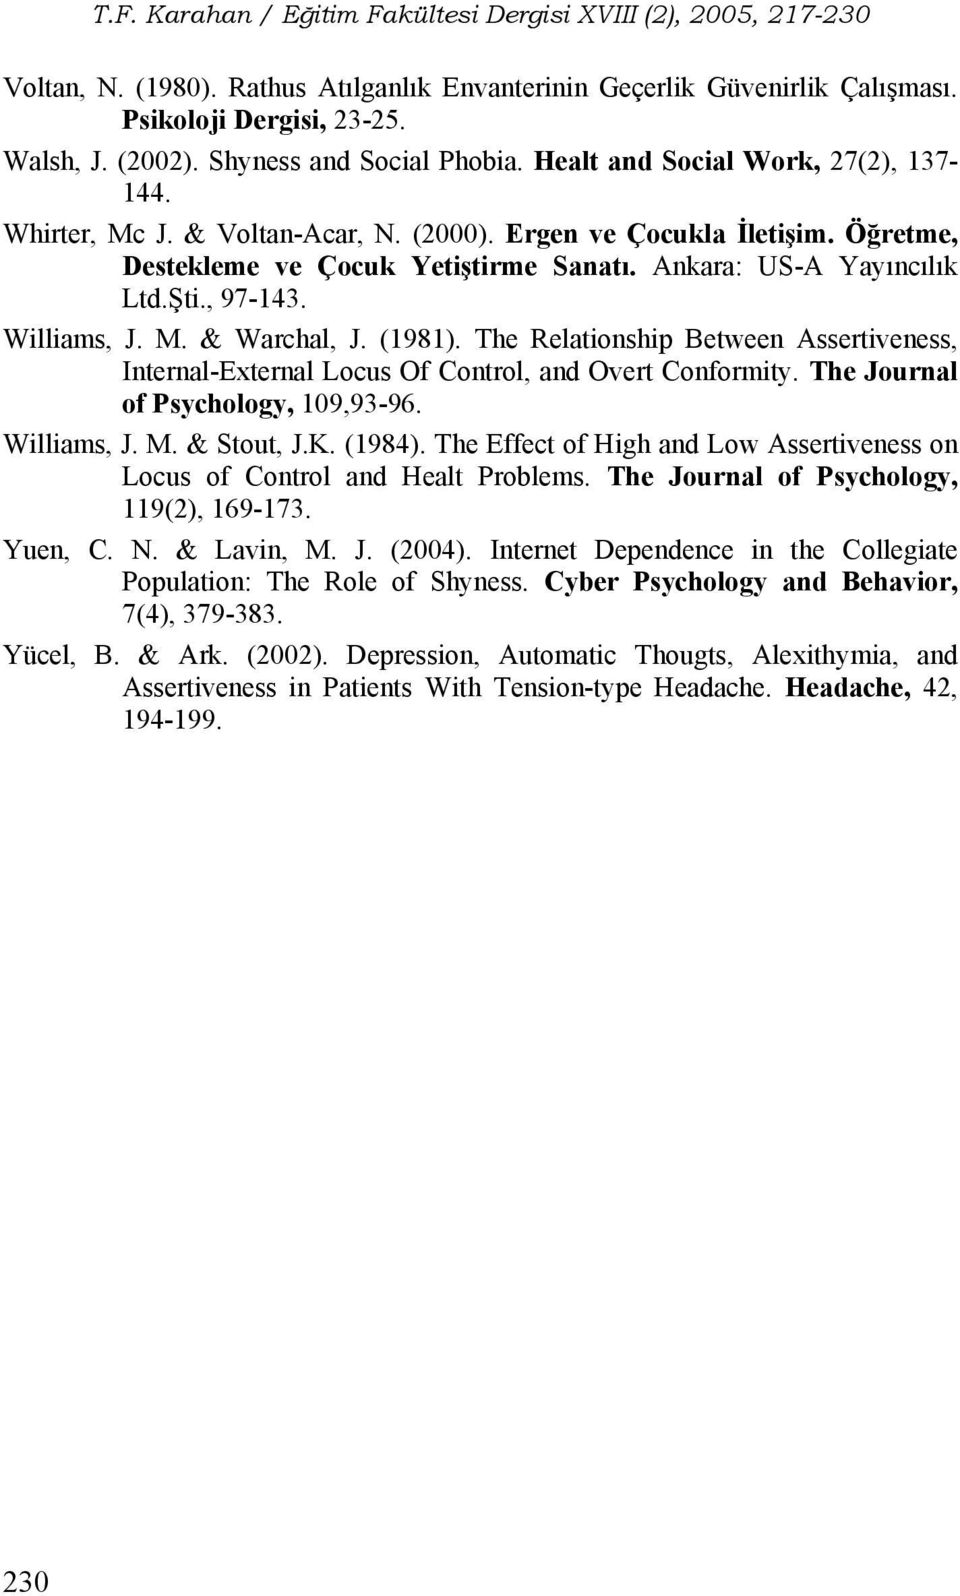 The Relationship Between Assertiveness, Internal-External Locus Of Control, and Overt Conformity. The Journal of Psychology, 109,93-96. Williams, J. M. & Stout, J.K. (1984).